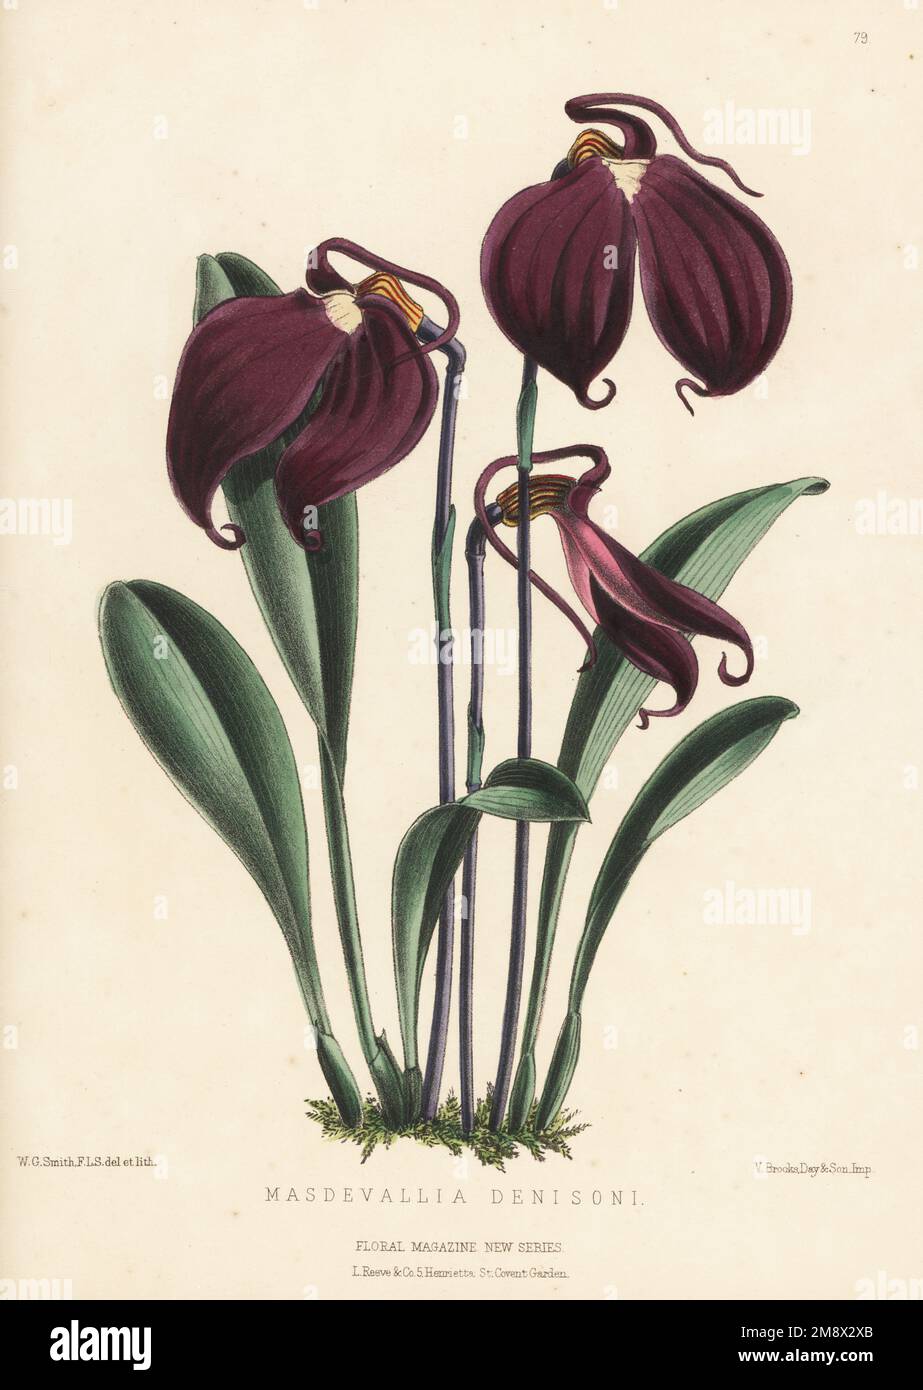 Little flag orchid, Masdevallia coccinea. As Masdevallia denisonii, exhibited by the orchid enthusiast William Denison, Lord Londesborough. Handcolored botanical illustration drawn and lithographed by Worthington George Smith from Henry Honywood Dombrain's Floral Magazine, New Series, Volume 2, L. Reeve, London, 1873. Lithograph printed  by Vincent Brooks, Day & Son. Stock Photo